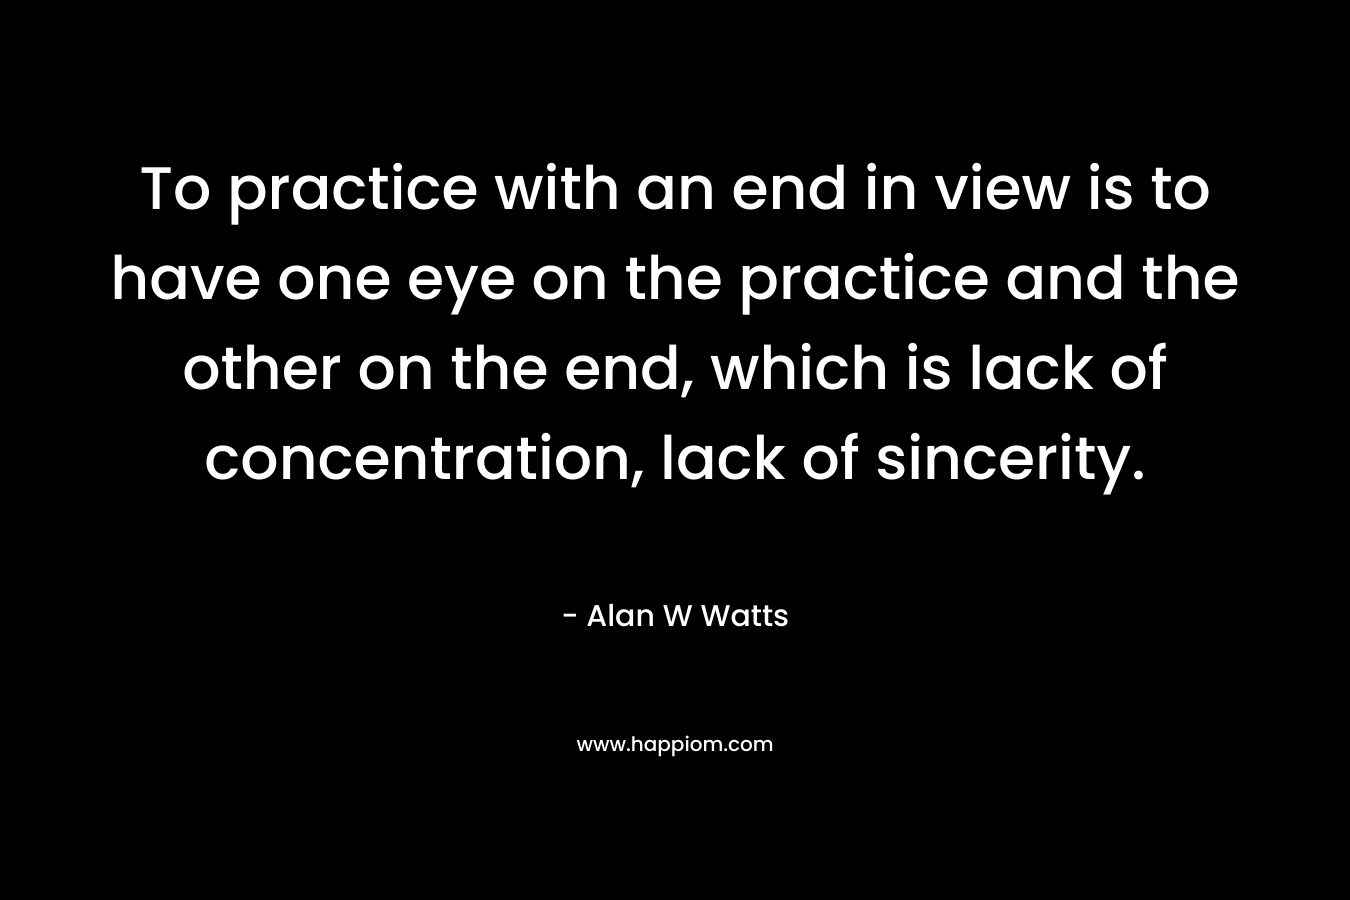 To practice with an end in view is to have one eye on the practice and the other on the end, which is lack of concentration, lack of sincerity. – Alan W Watts